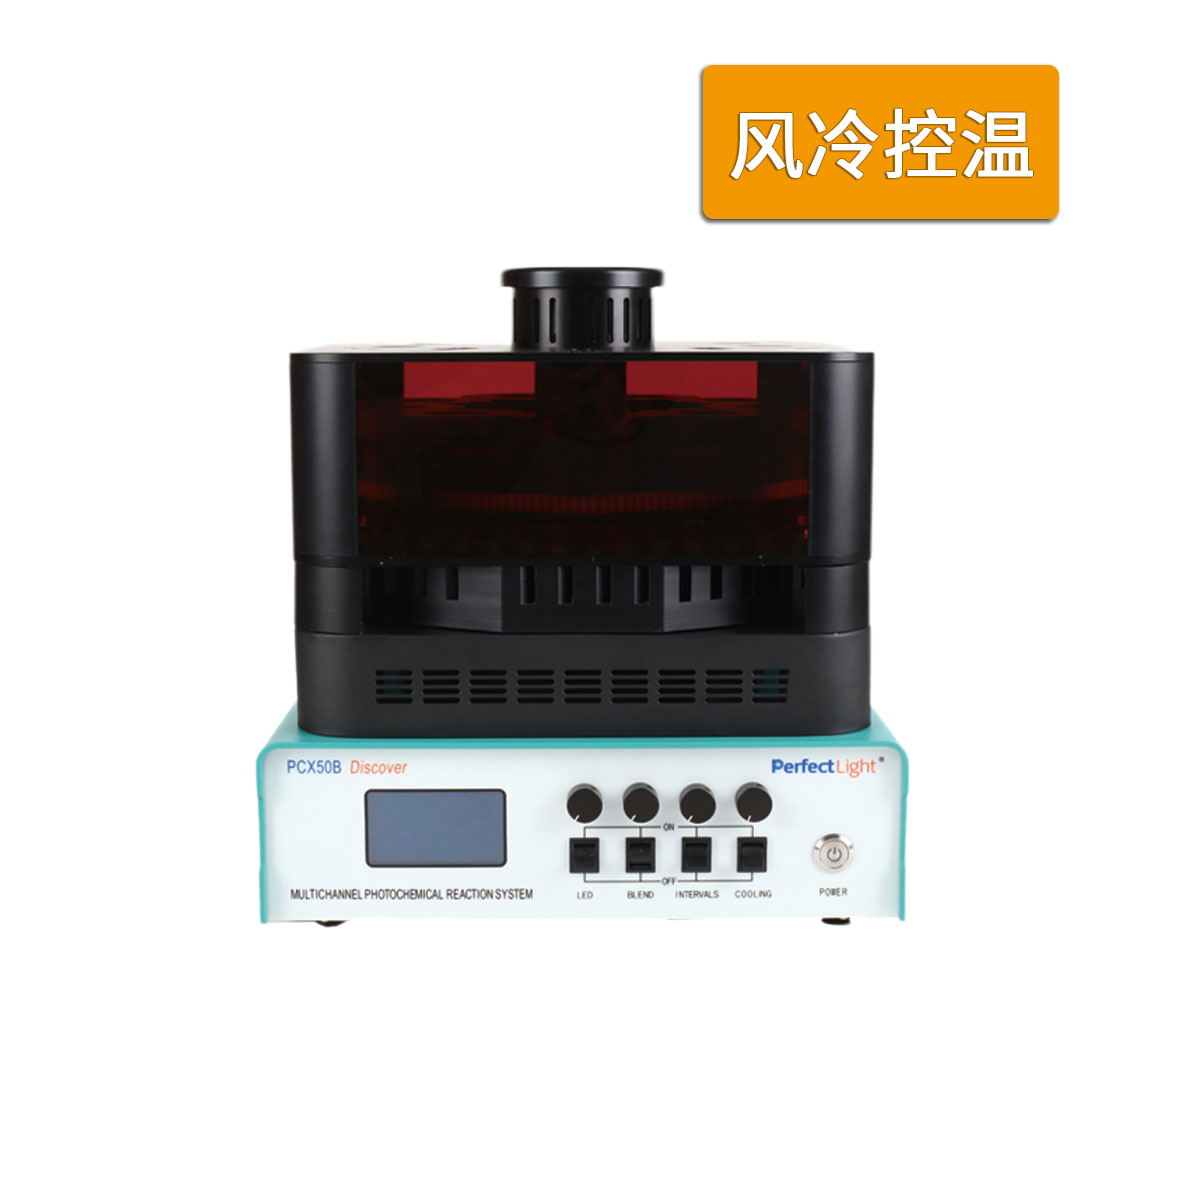 PCX-50B Multi-channel photochemical reaction syste